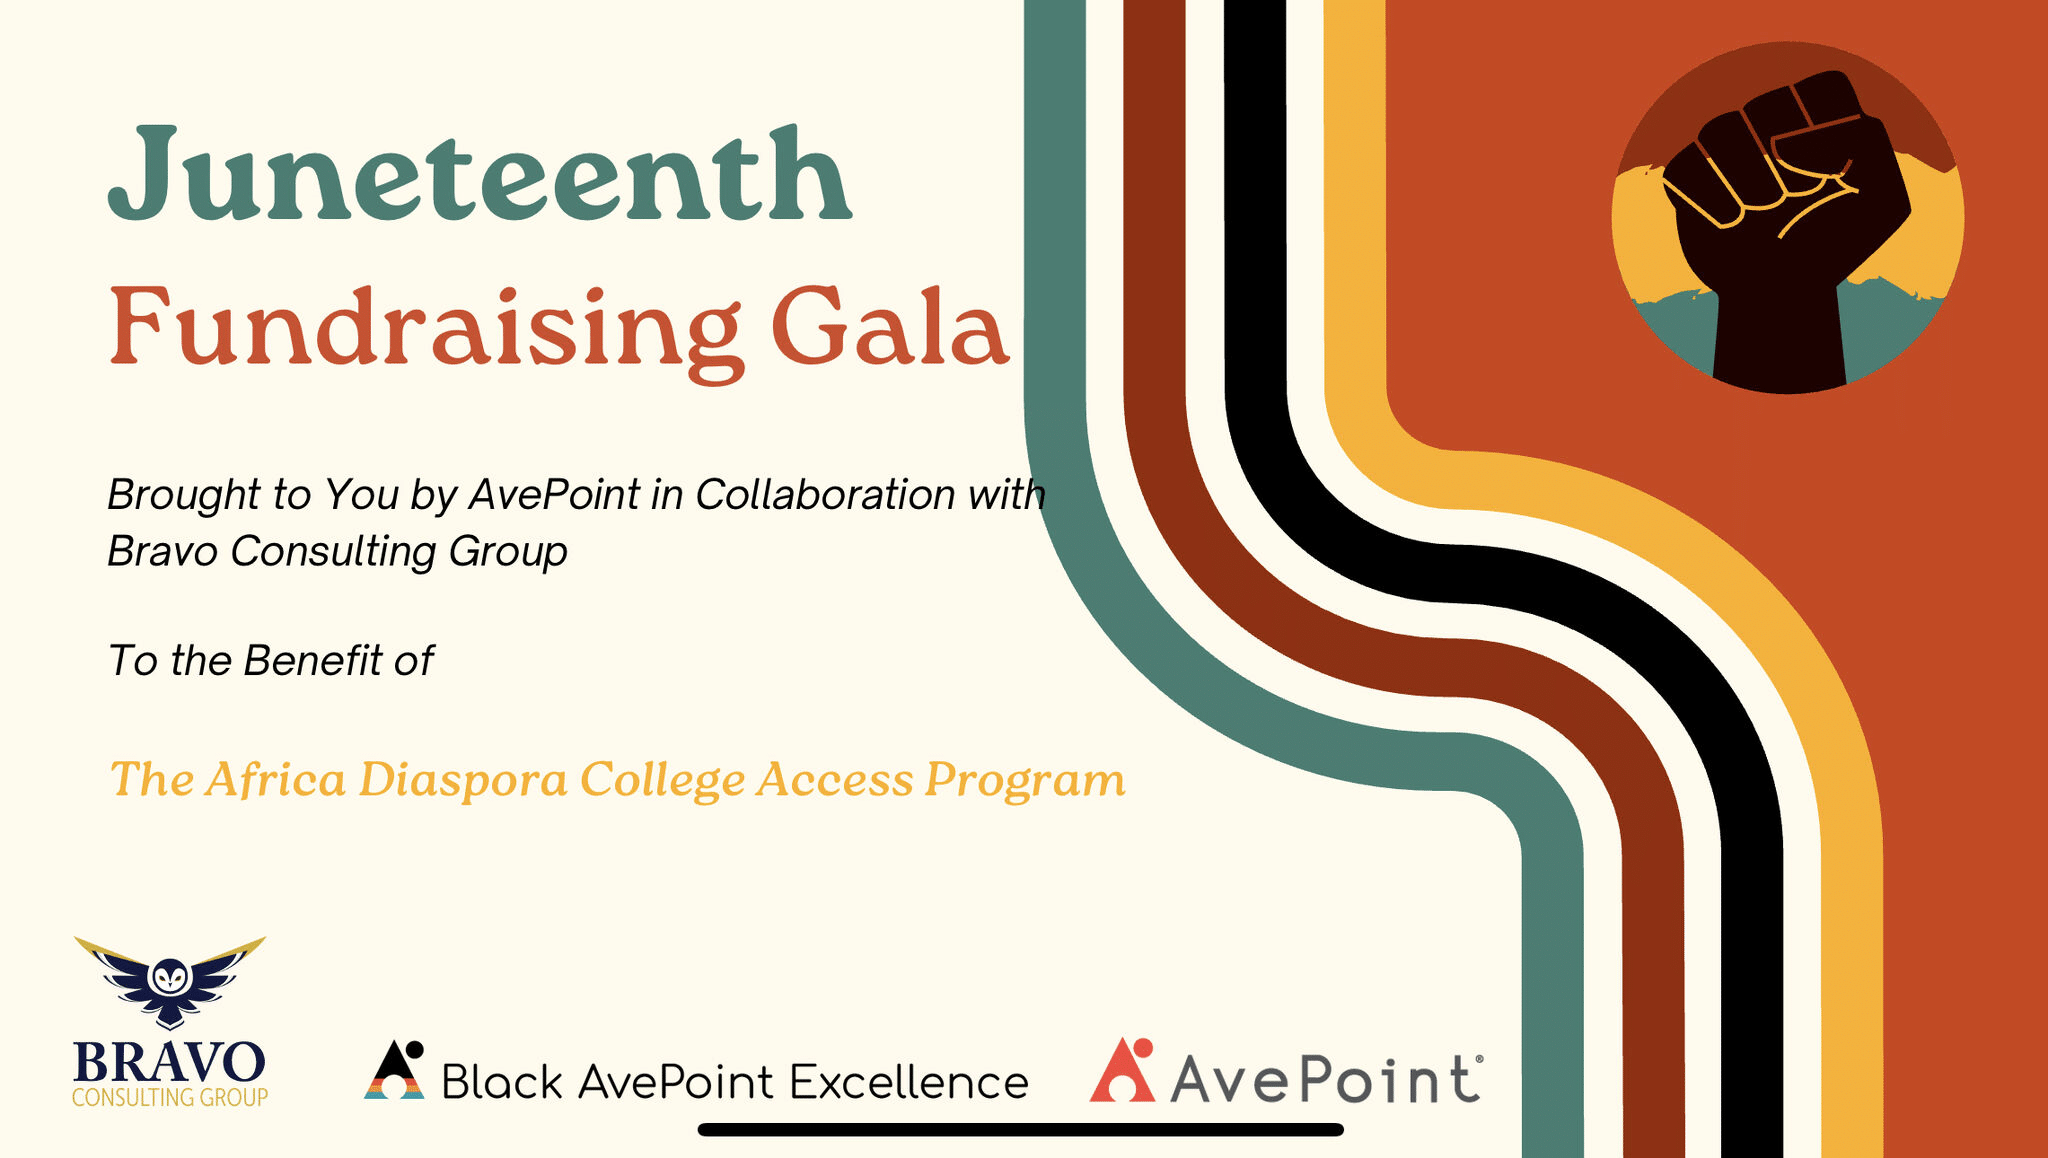 Flyer for Juneteenth Fundraising Gala held by AvePoint and Bravo Consulting Group